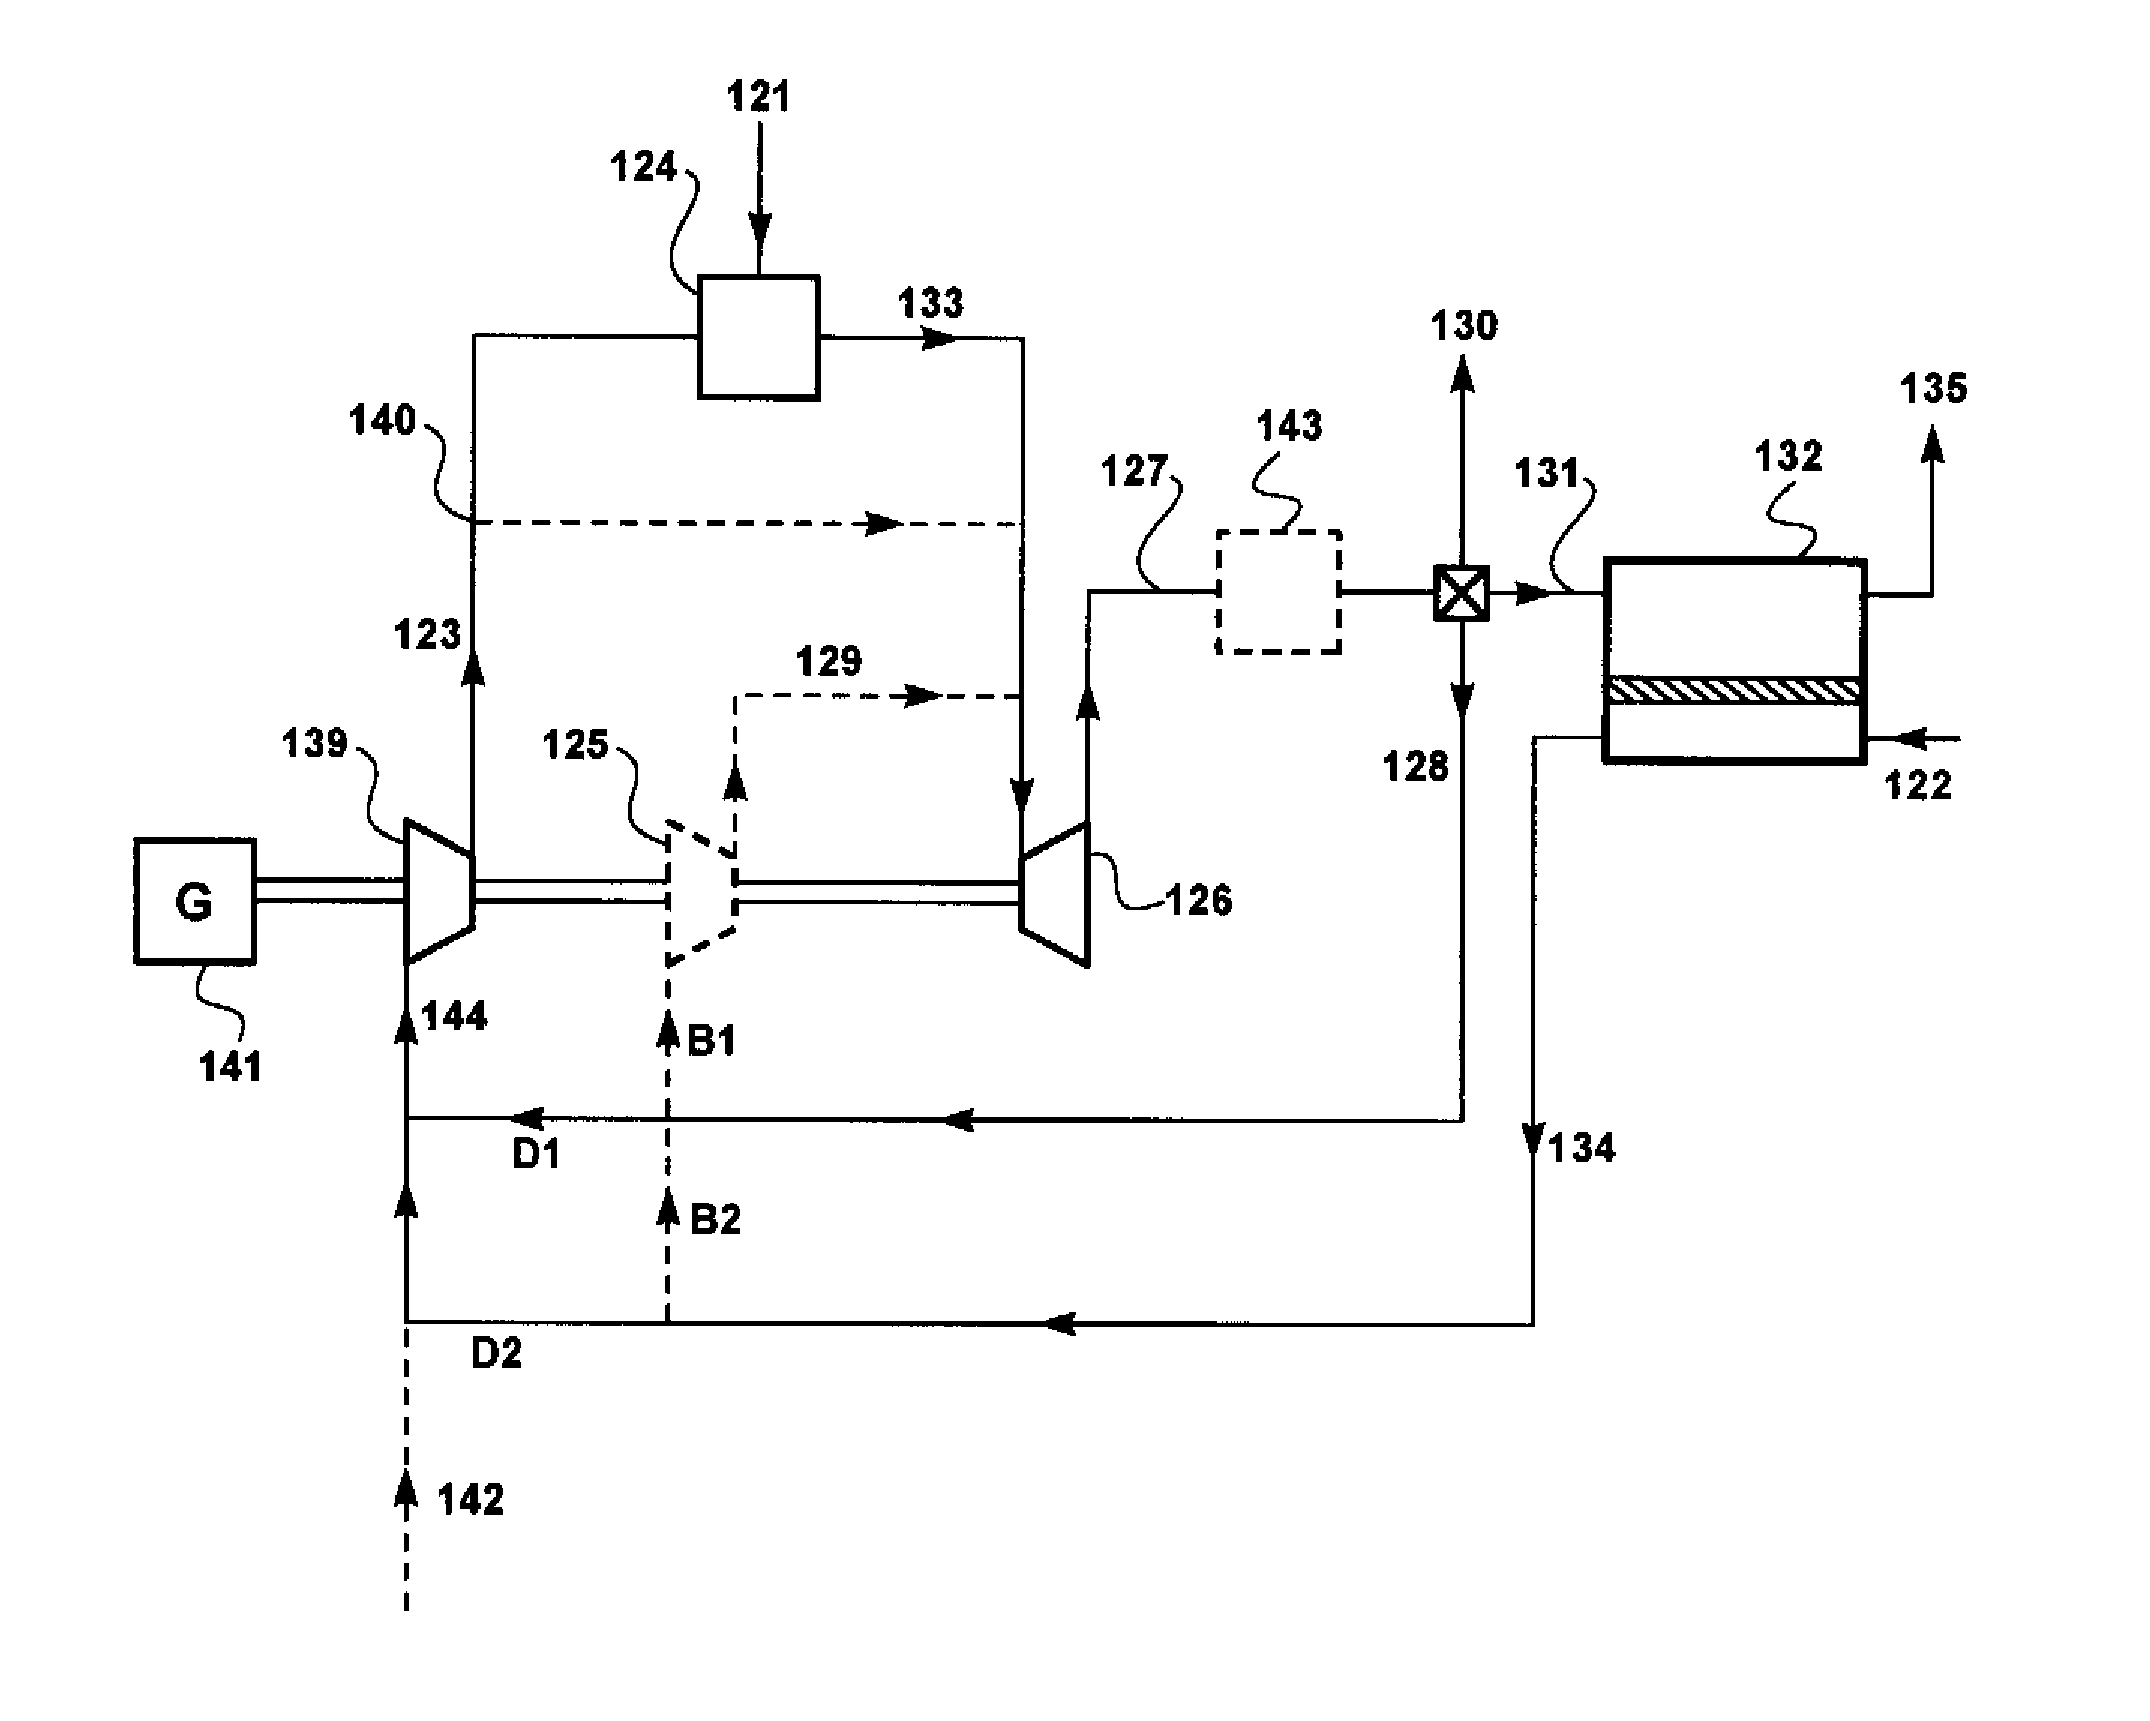 Power generation process with partial recycle of carbon dioxide